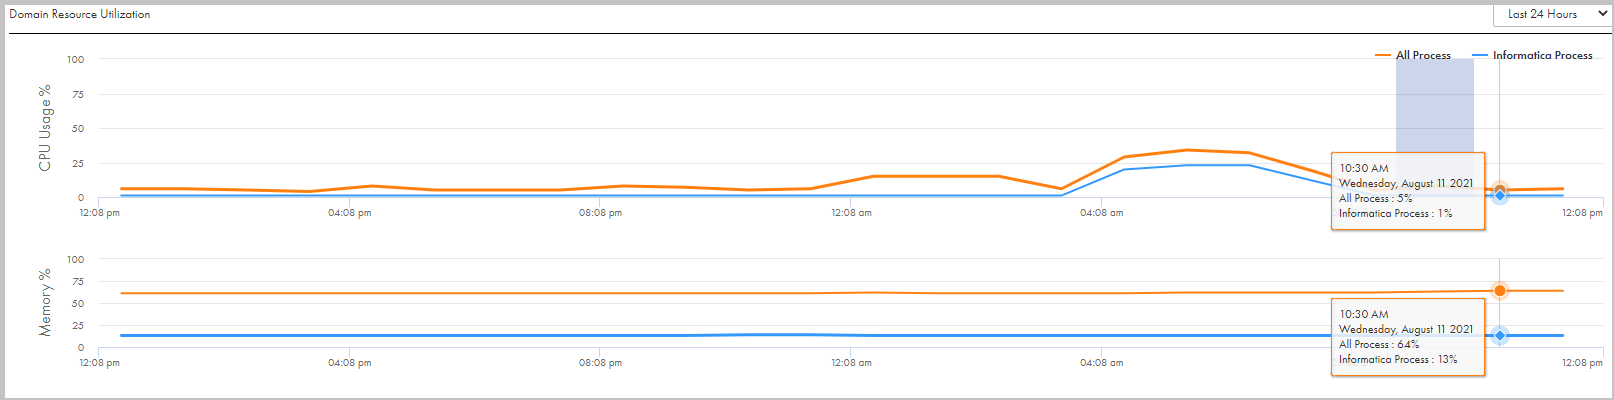 The Domain Resource Utilization graph shows the CPU usage and memory statistics of a domain for the last 24 hours. 
					 